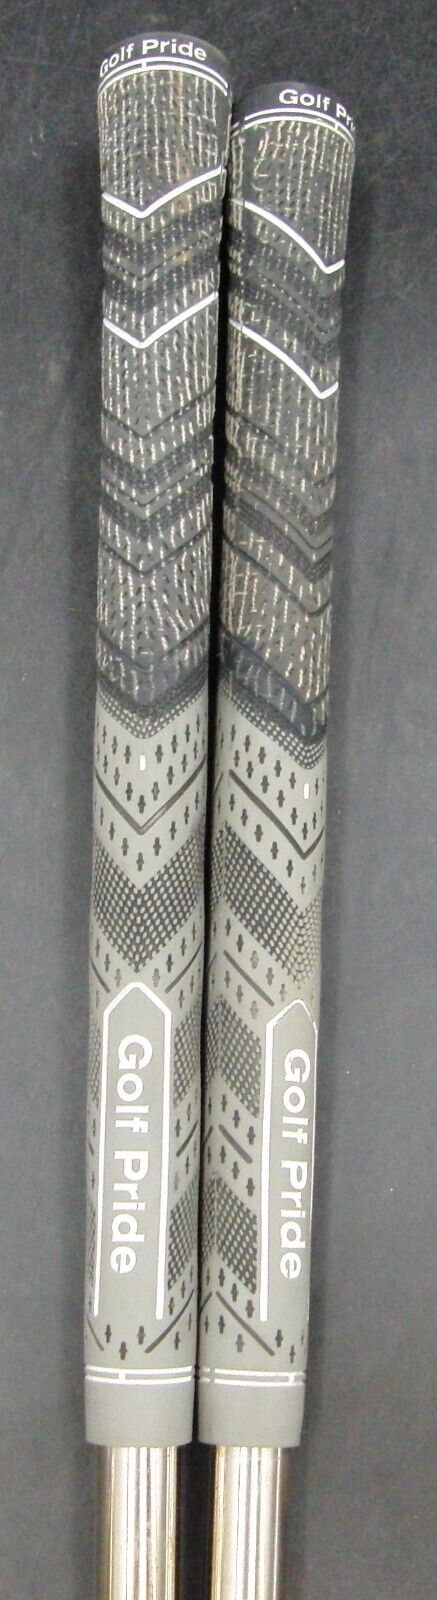 Set of 2 Titleist 695 MB Forged 3 and 4 Irons Regular Steel Shafts G/Pride Grips